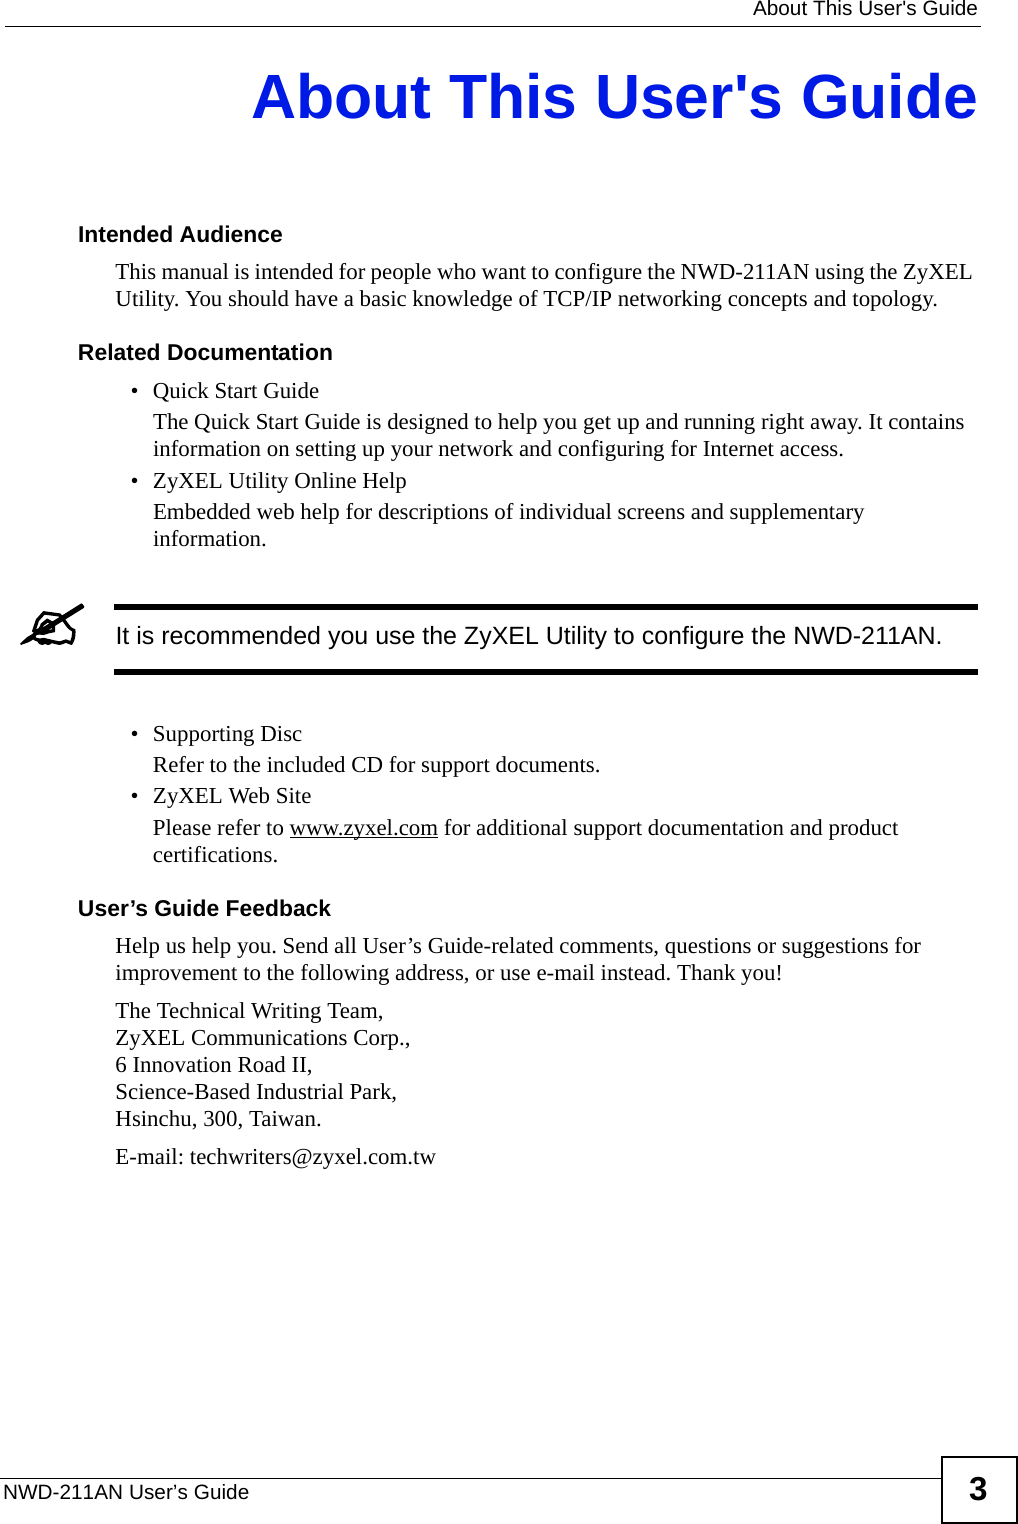   About This User&apos;s GuideNWD-211AN User’s Guide 3About This User&apos;s GuideIntended AudienceThis manual is intended for people who want to configure the NWD-211AN using the ZyXEL Utility. You should have a basic knowledge of TCP/IP networking concepts and topology.Related Documentation• Quick Start Guide The Quick Start Guide is designed to help you get up and running right away. It contains information on setting up your network and configuring for Internet access.• ZyXEL Utility Online HelpEmbedded web help for descriptions of individual screens and supplementary information.&quot;It is recommended you use the ZyXEL Utility to configure the NWD-211AN.• Supporting DiscRefer to the included CD for support documents.• ZyXEL Web SitePlease refer to www.zyxel.com for additional support documentation and product certifications.User’s Guide FeedbackHelp us help you. Send all User’s Guide-related comments, questions or suggestions for improvement to the following address, or use e-mail instead. Thank you!The Technical Writing Team,ZyXEL Communications Corp.,6 Innovation Road II,Science-Based Industrial Park, Hsinchu, 300, Taiwan.E-mail: techwriters@zyxel.com.tw